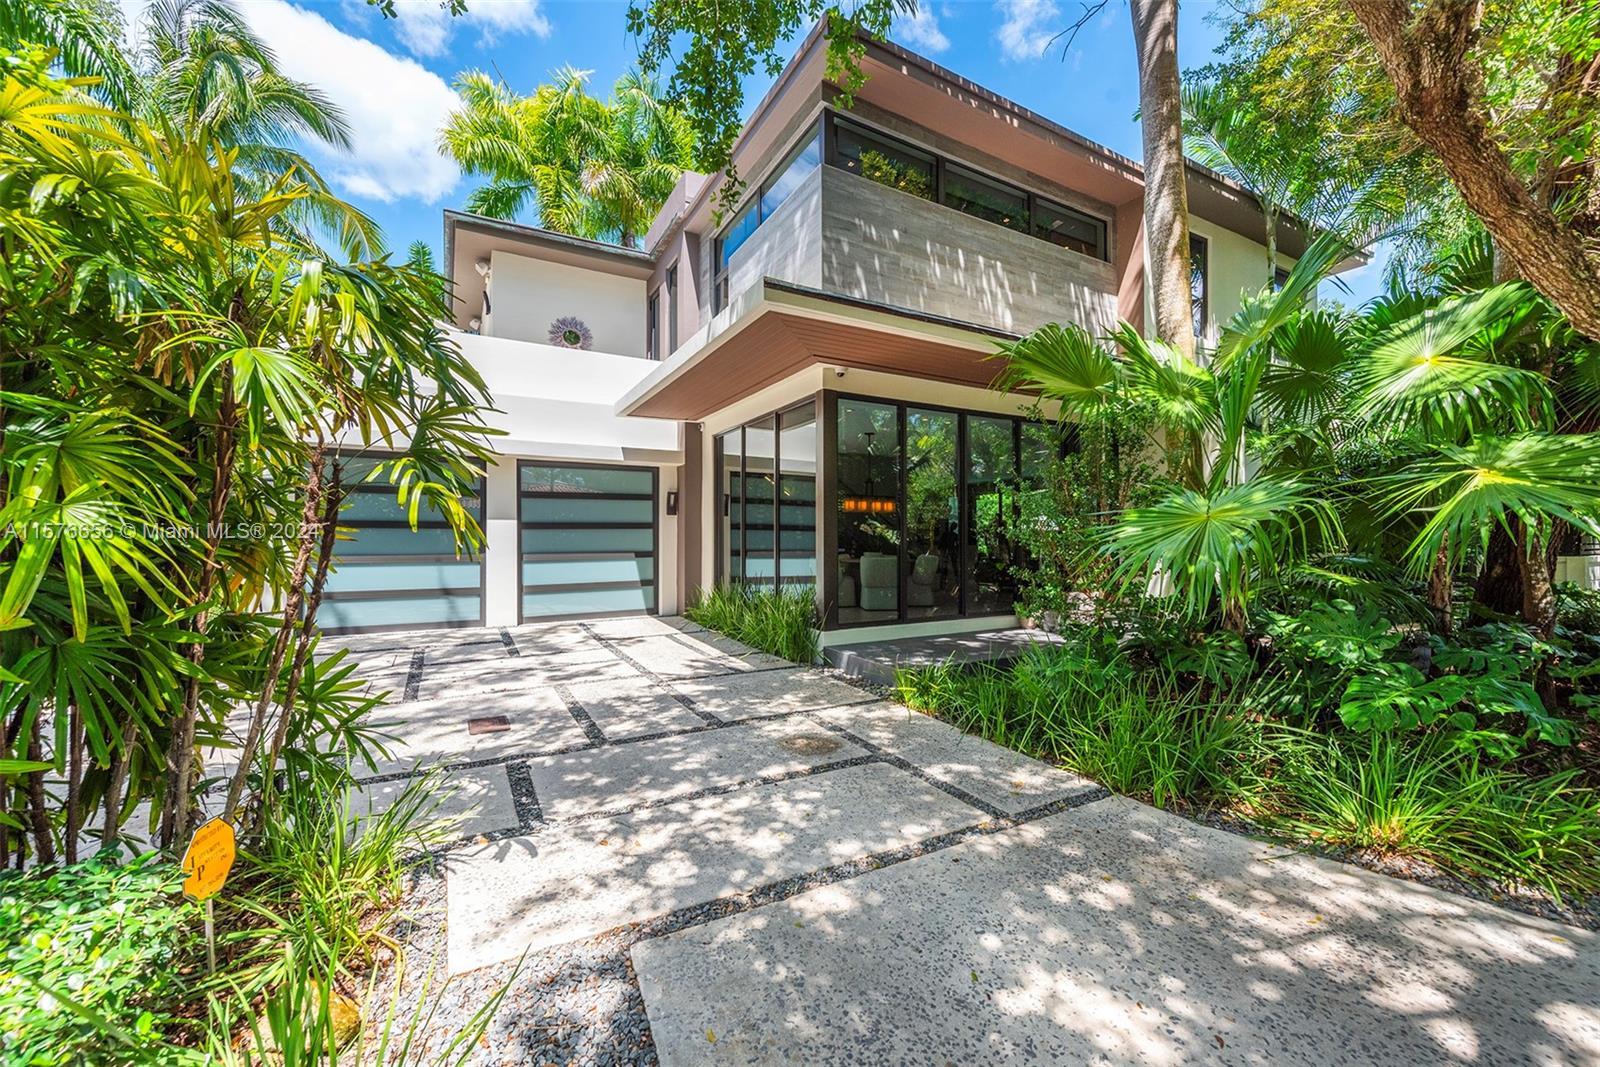 Modern Miami intersects w/Old Grove in this contemporary masterpiece framed by mature palms, oaks & 